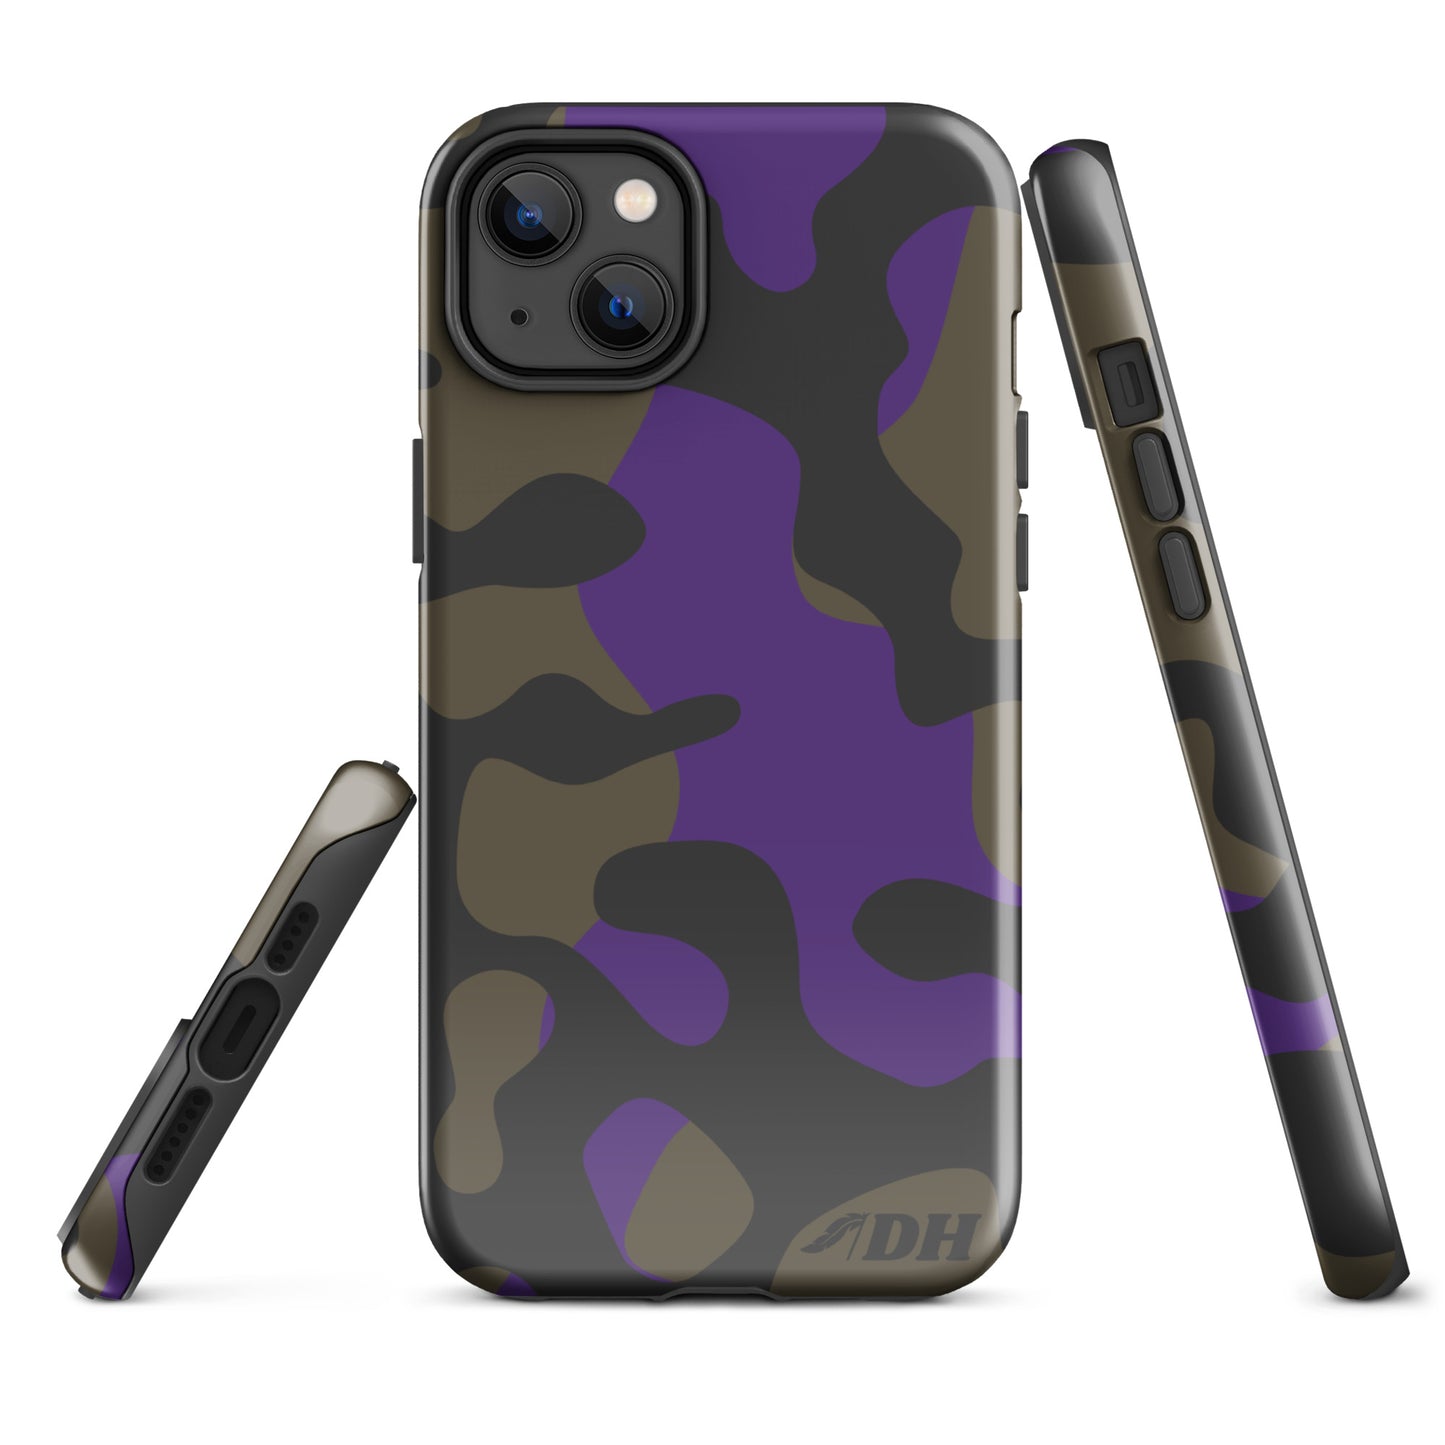 DH TIMBER Tough Case for iPhone® in Purple